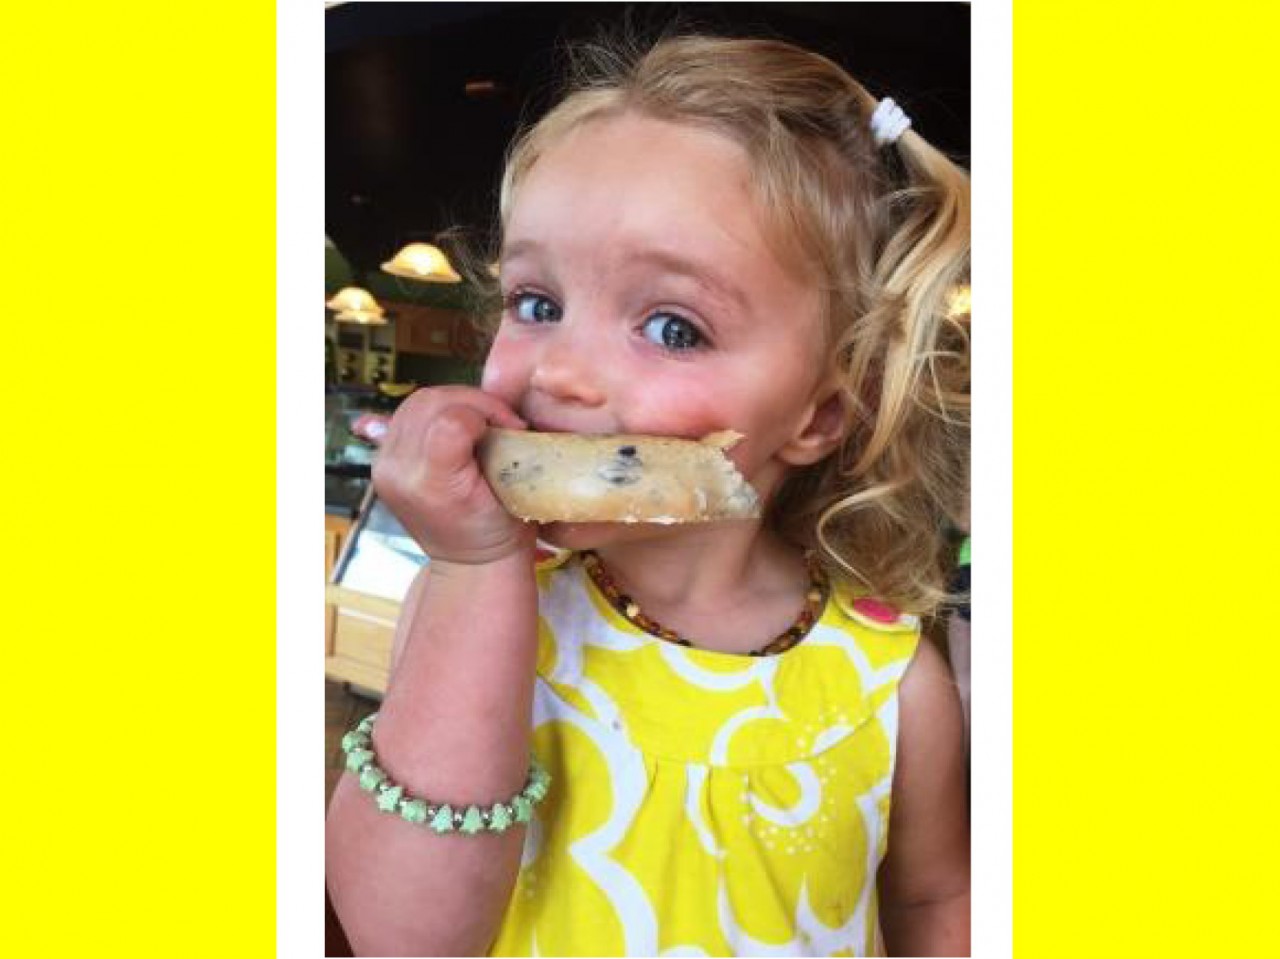 3 Options For Getting Your Picky Eater to Try Food This Summer